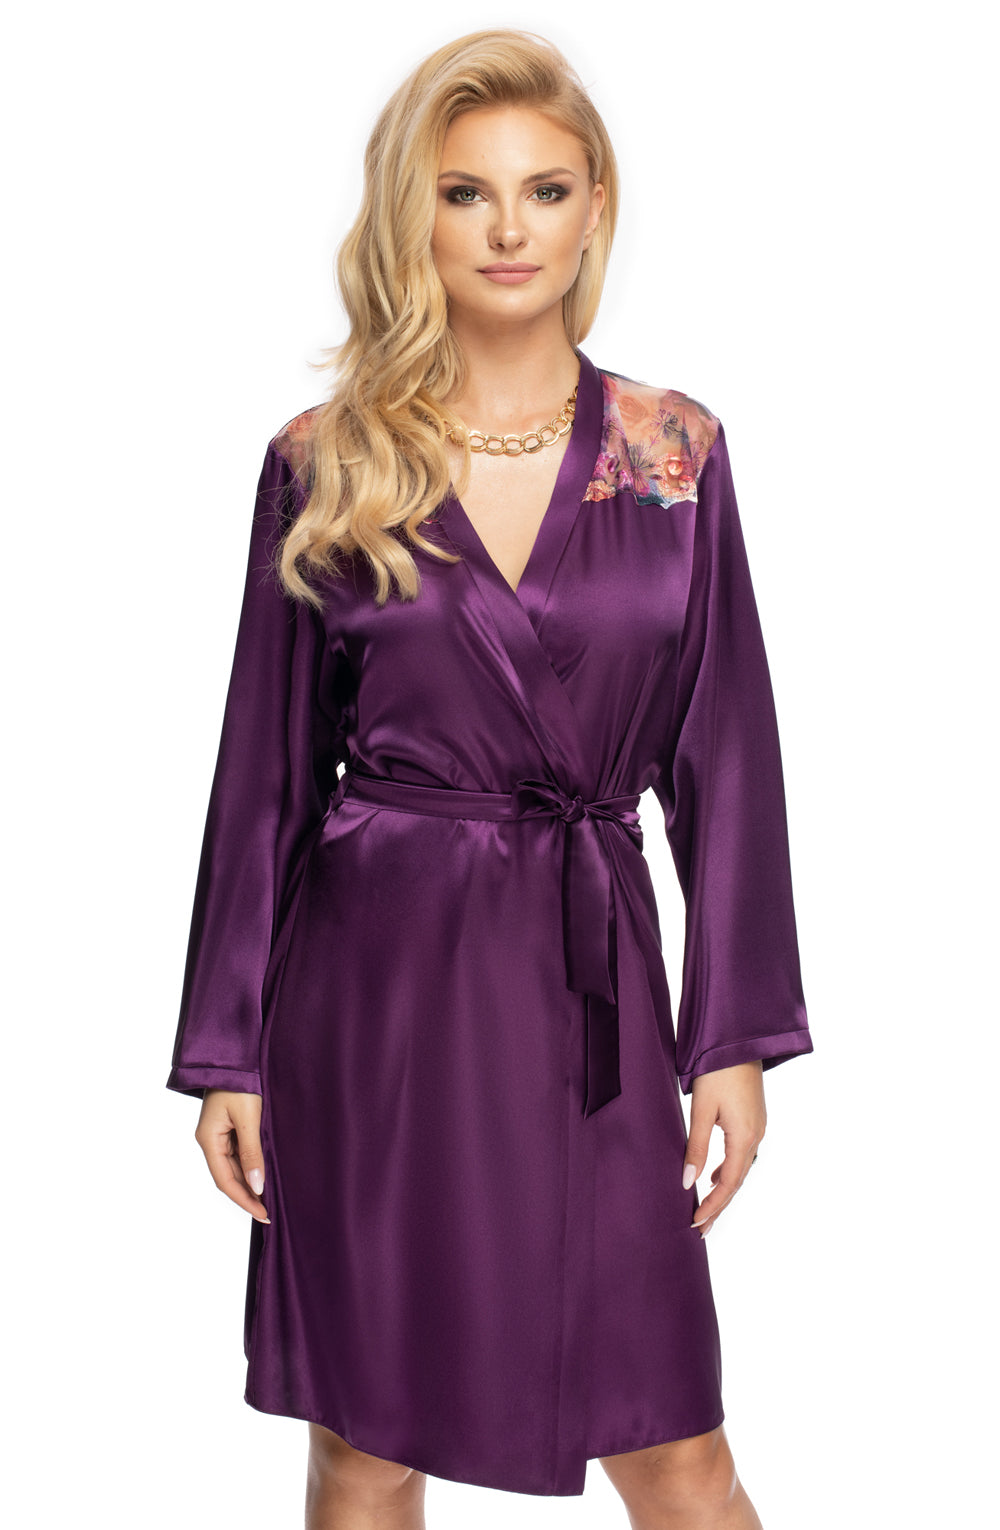 Irall Shelby Dressing Gown Purple - PureDiva